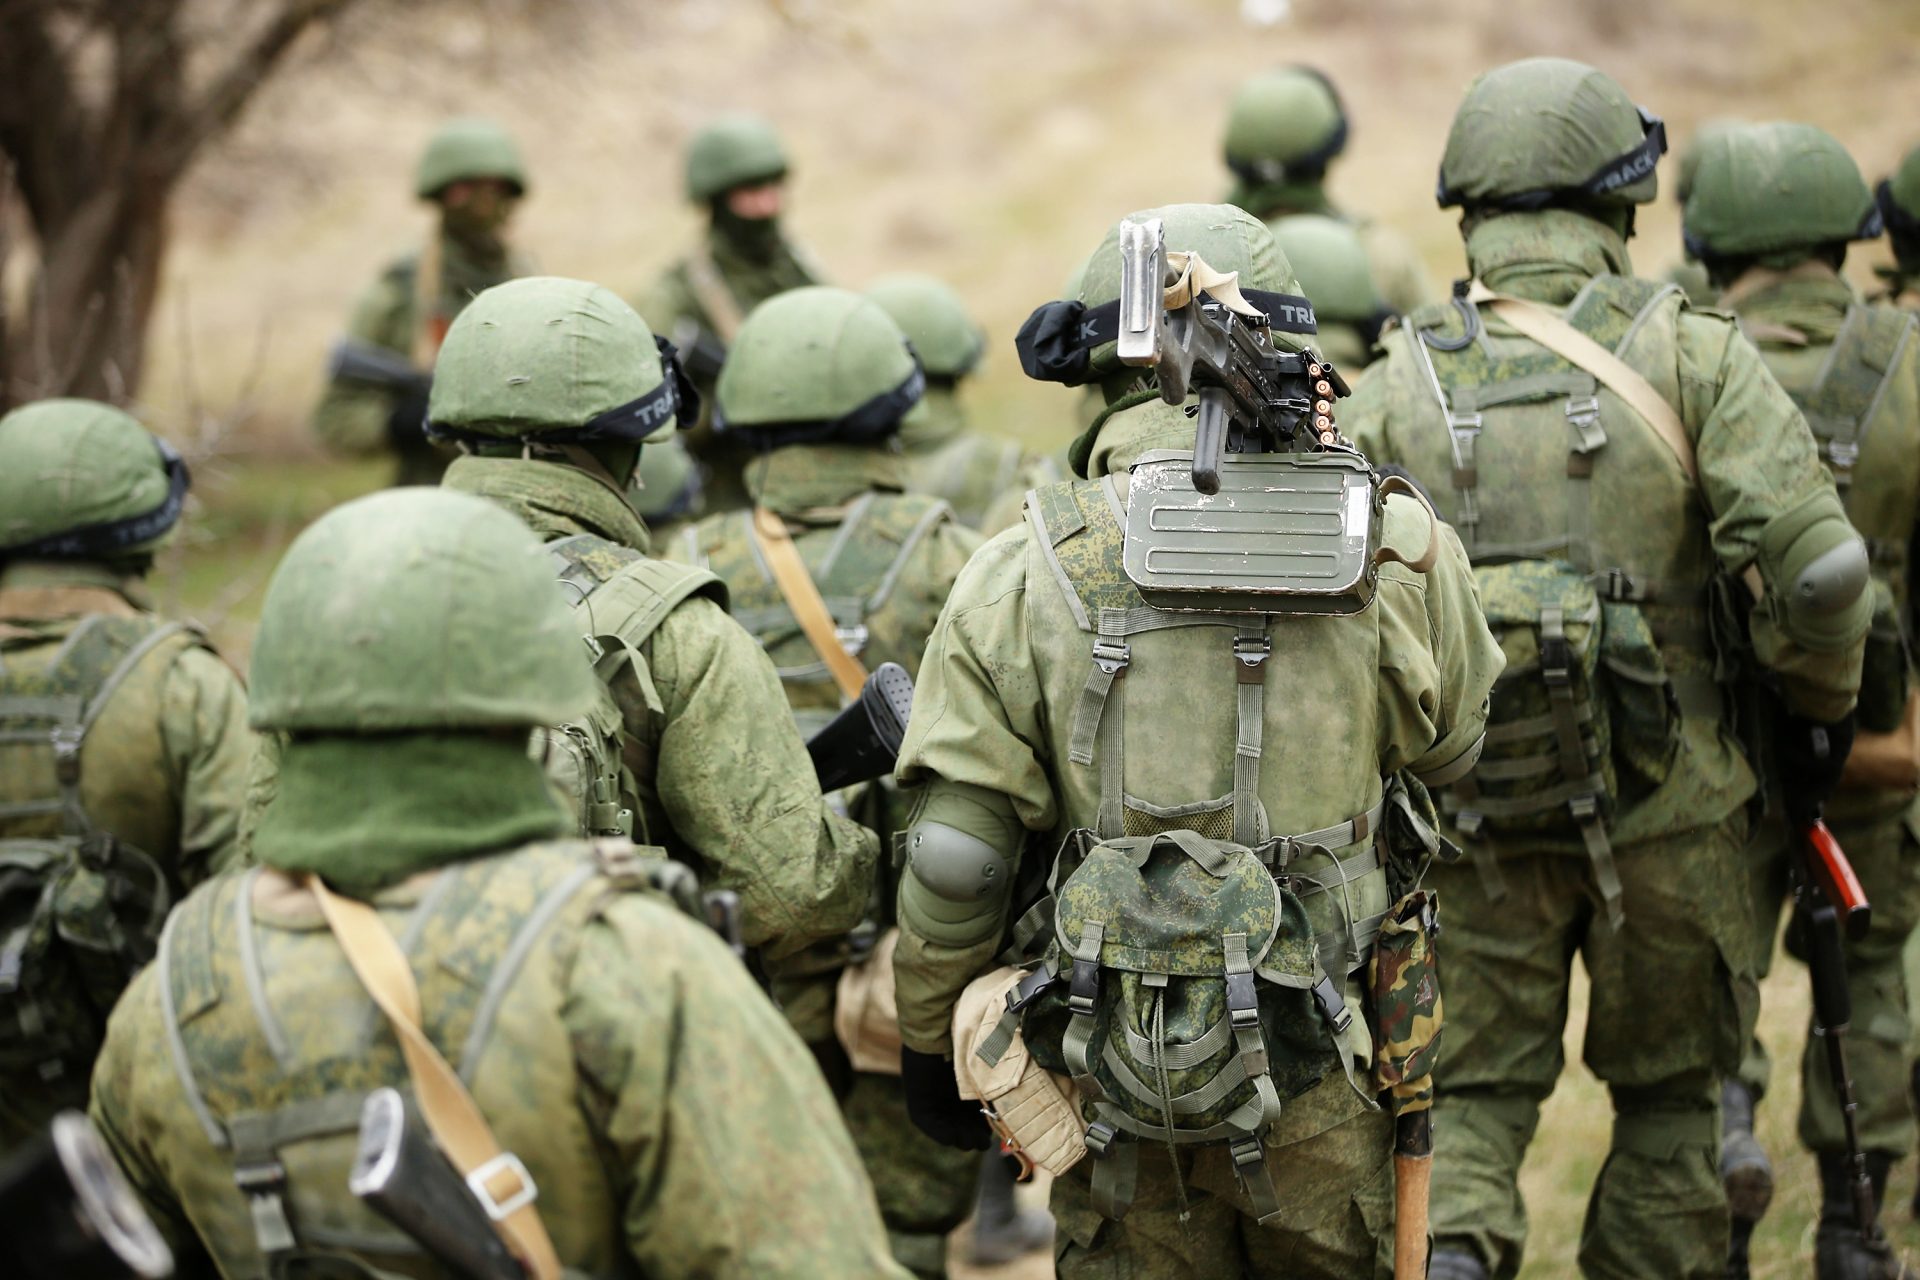 <p>Newsweek could not verify the authenticity of the video. However, this is not the first time that Moscow has been accused of using international mercenaries to fight in Ukraine.</p>